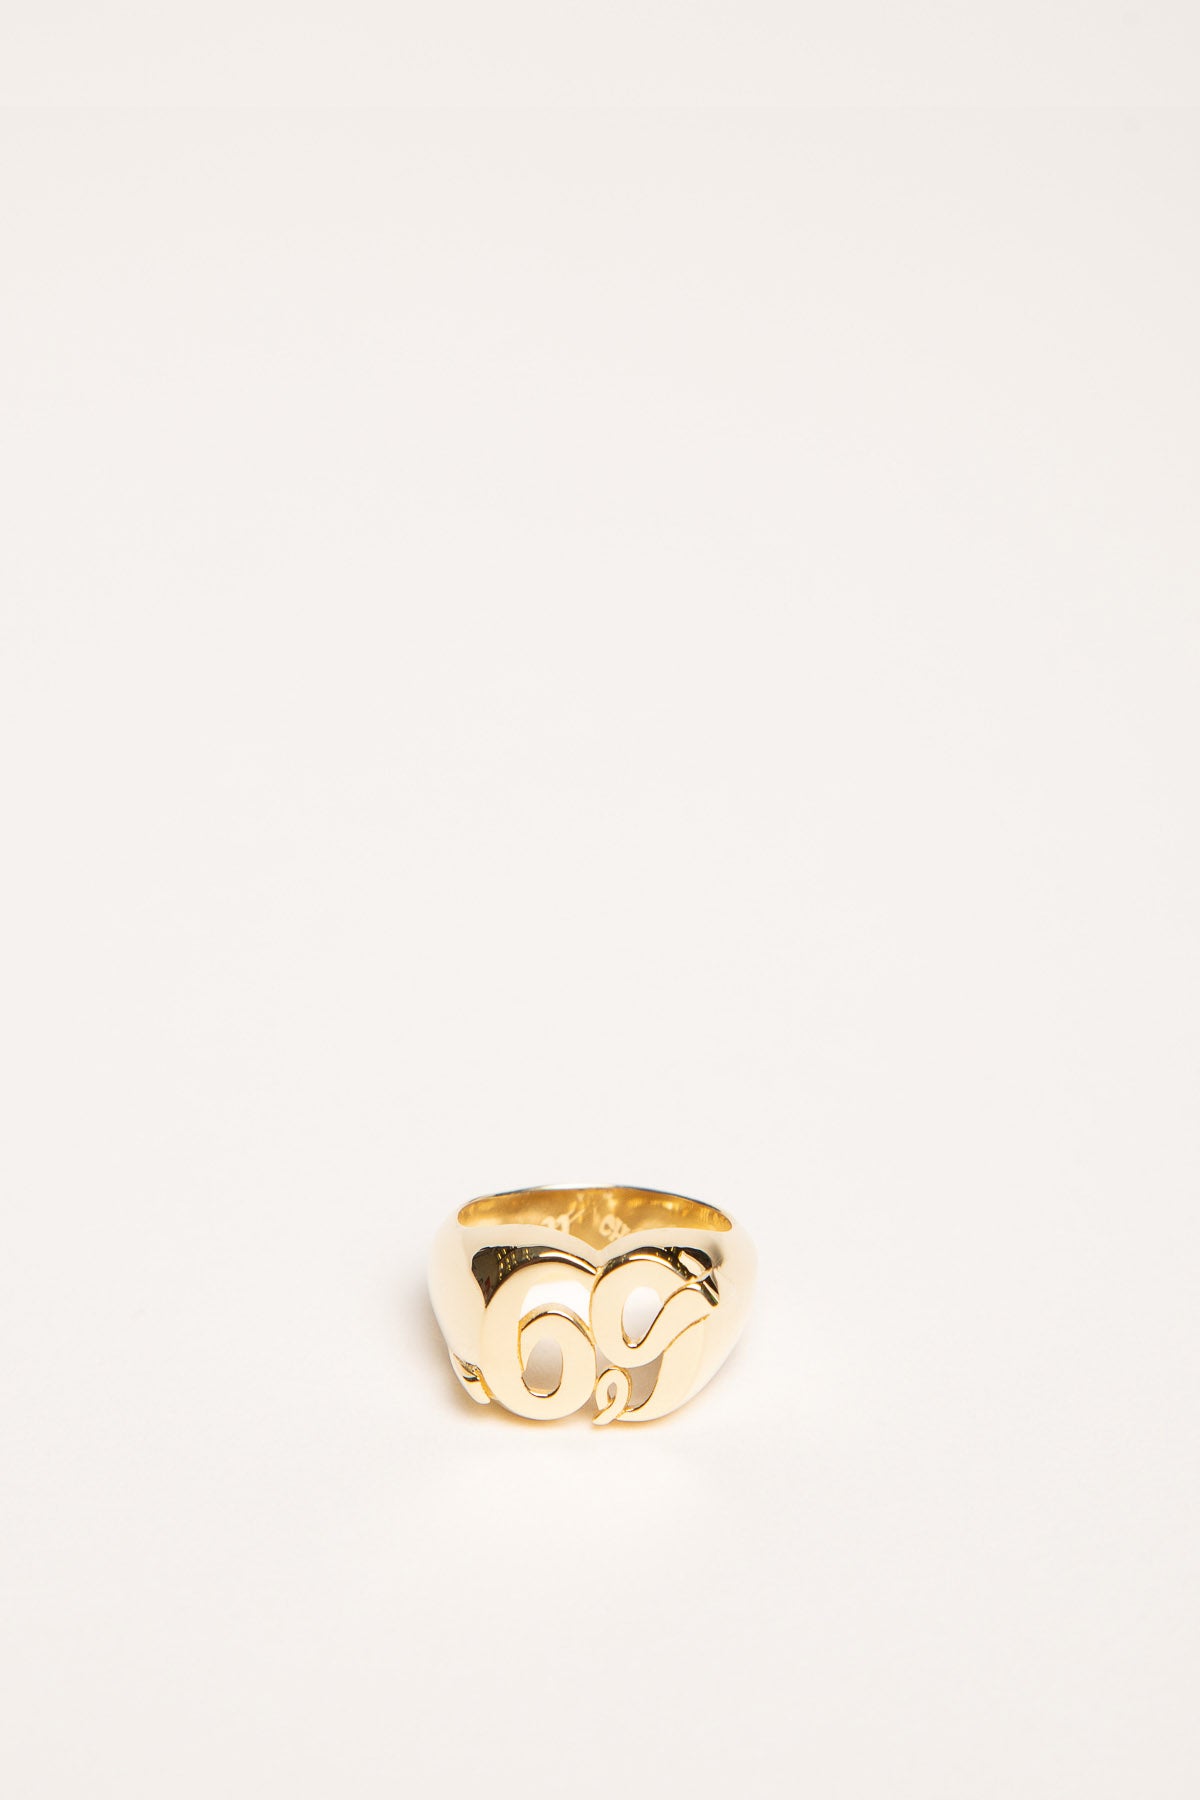 CHEMIST | YELLOW GOLD XS FACE 69 RING